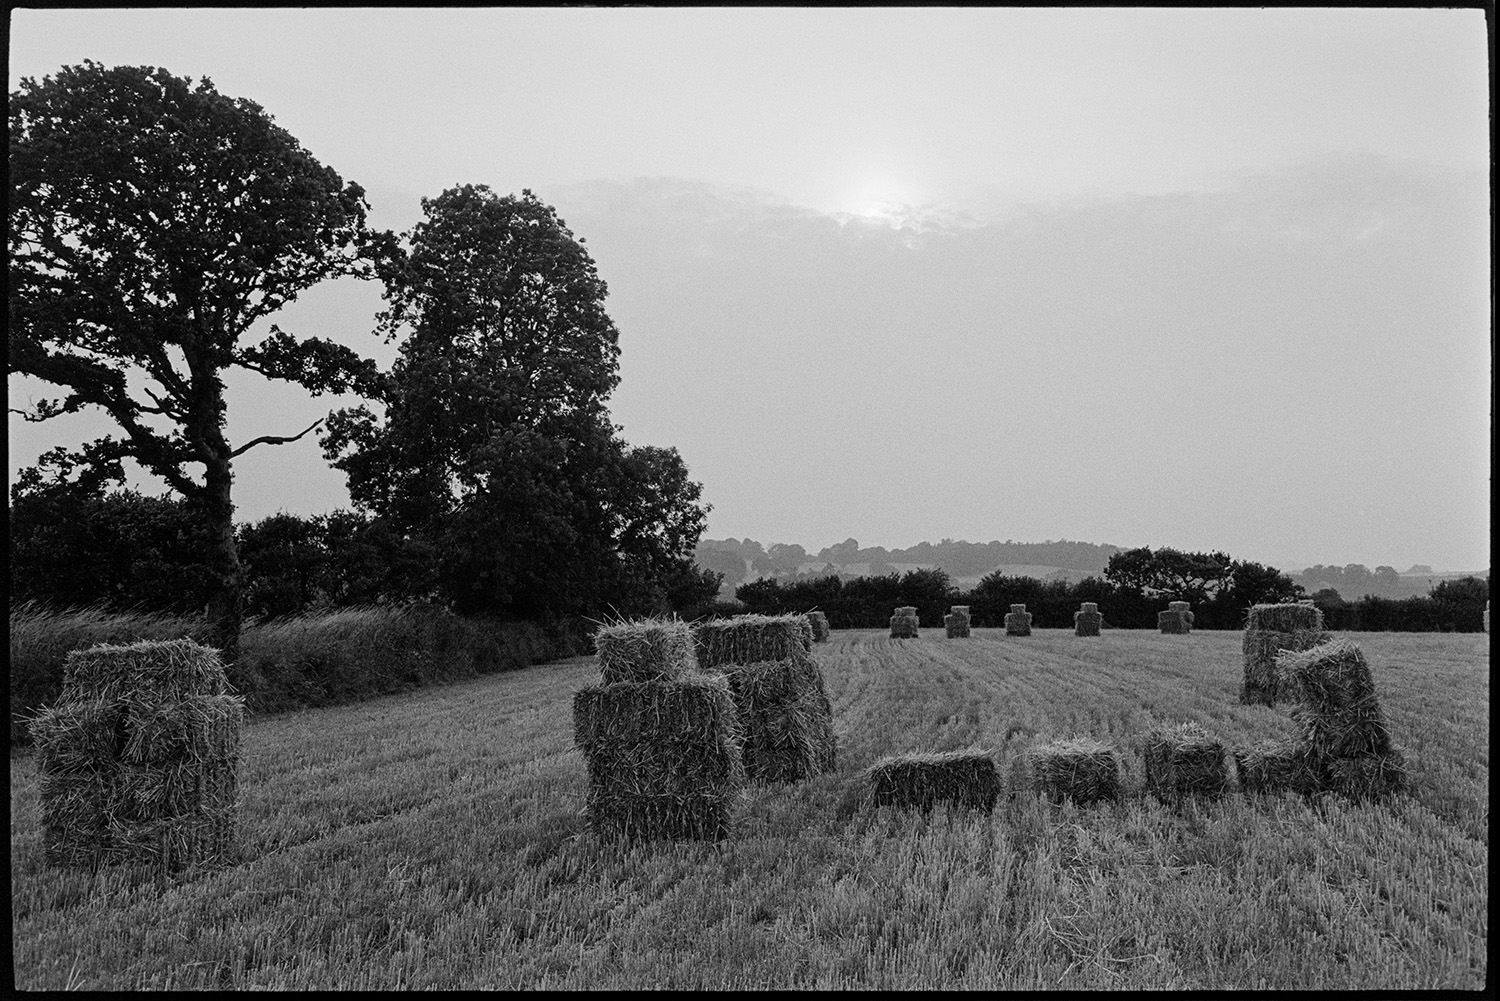 Straw bales in field. 
[Stacks of straw bales in a field at Dolton.]